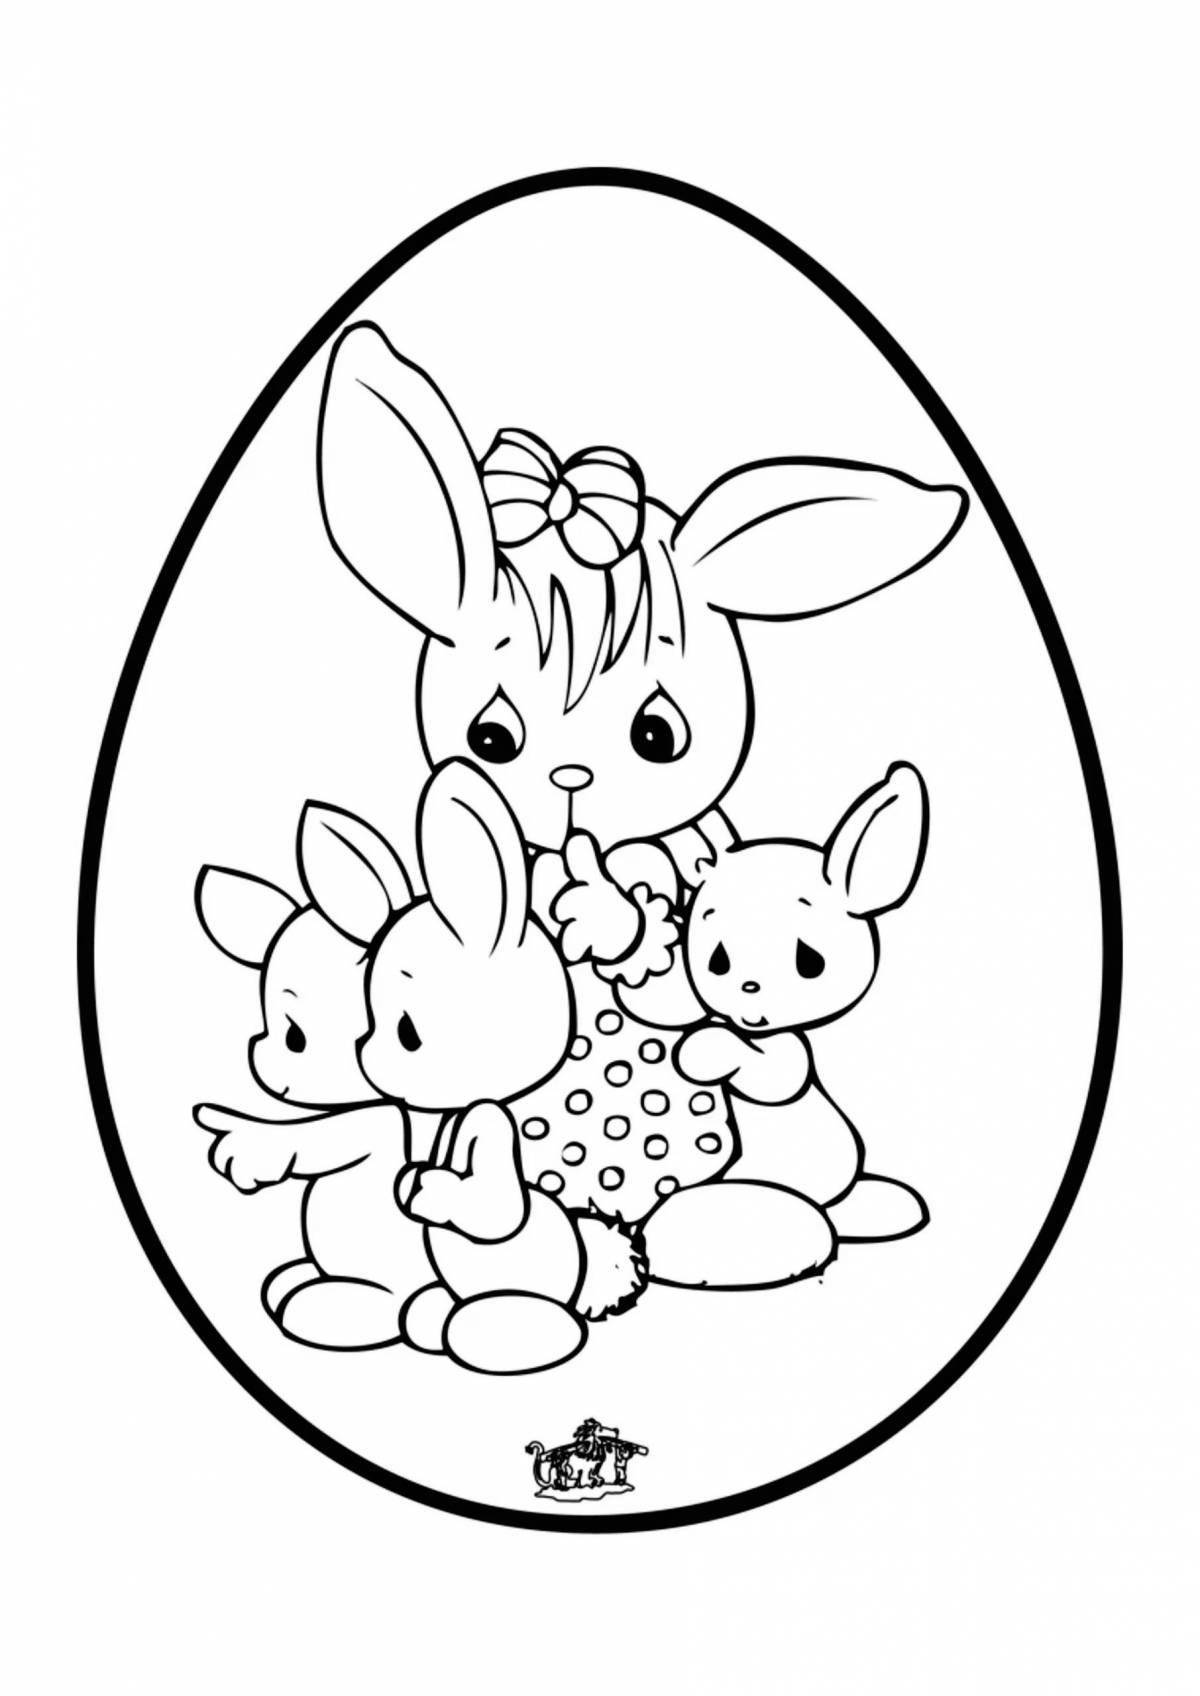 Bunny coloring book for kids